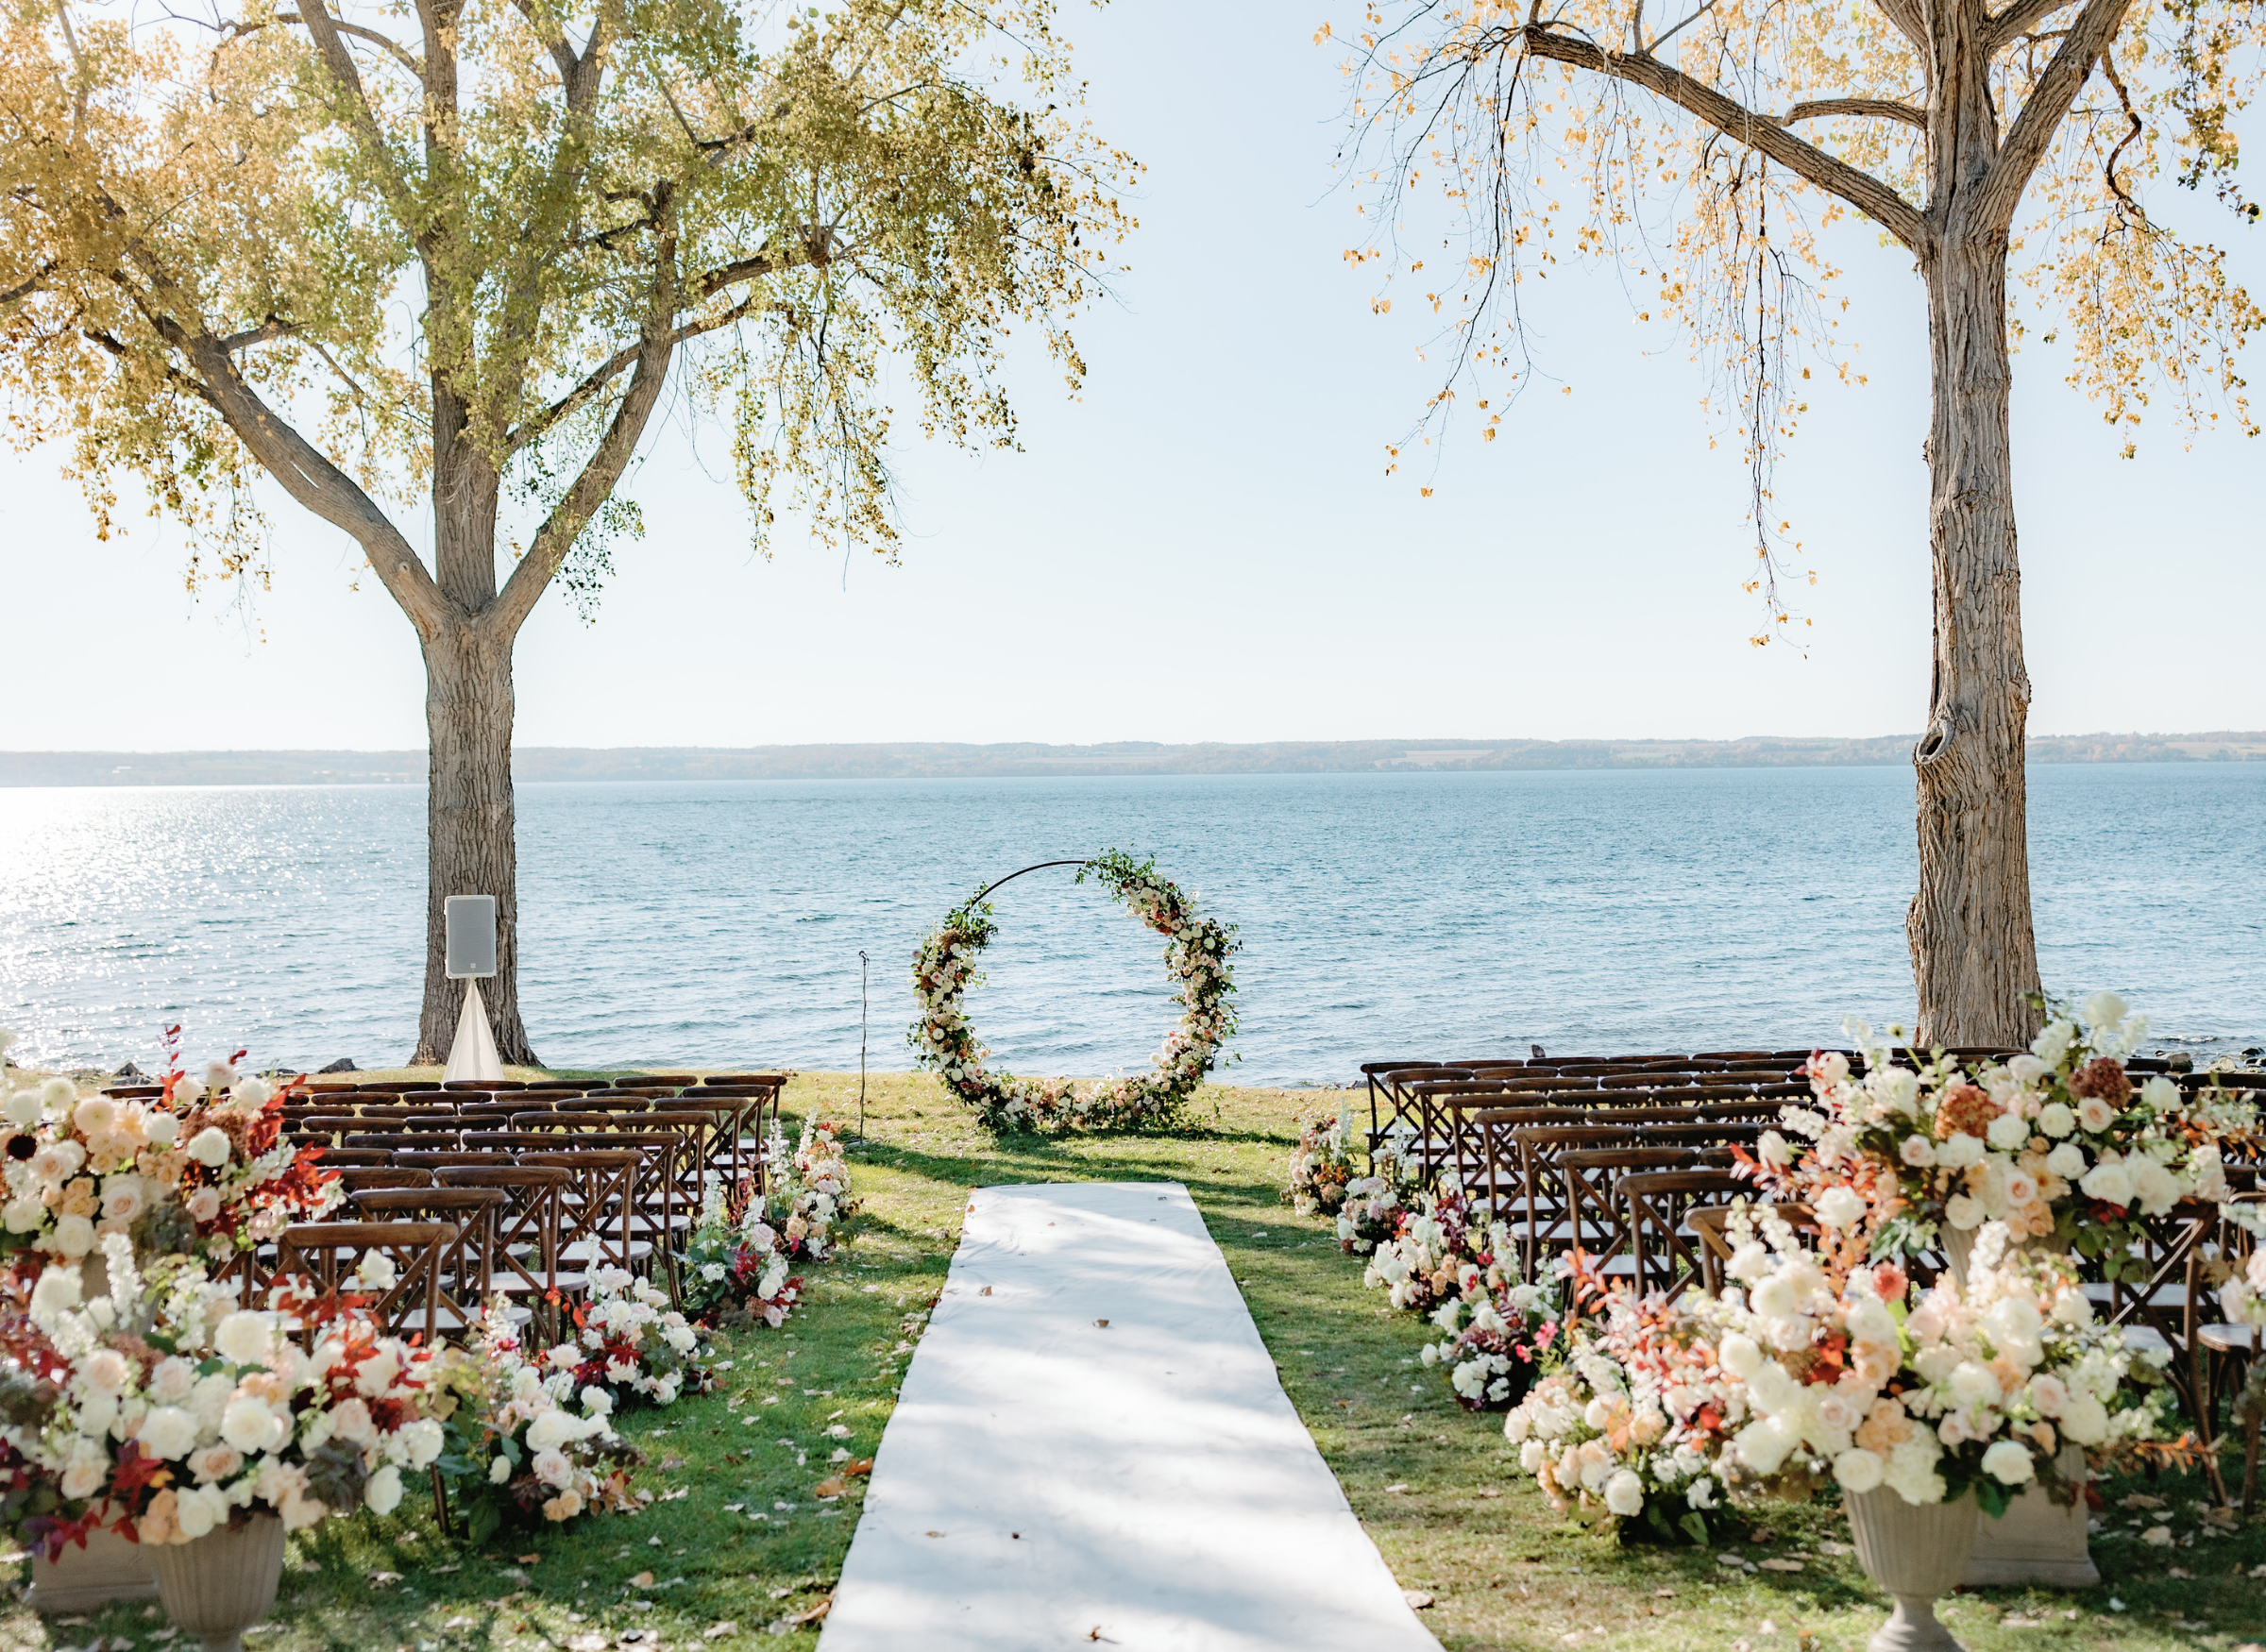 Outdoor wedding ceremony in upstate new york with white aisle runner and brown chairs